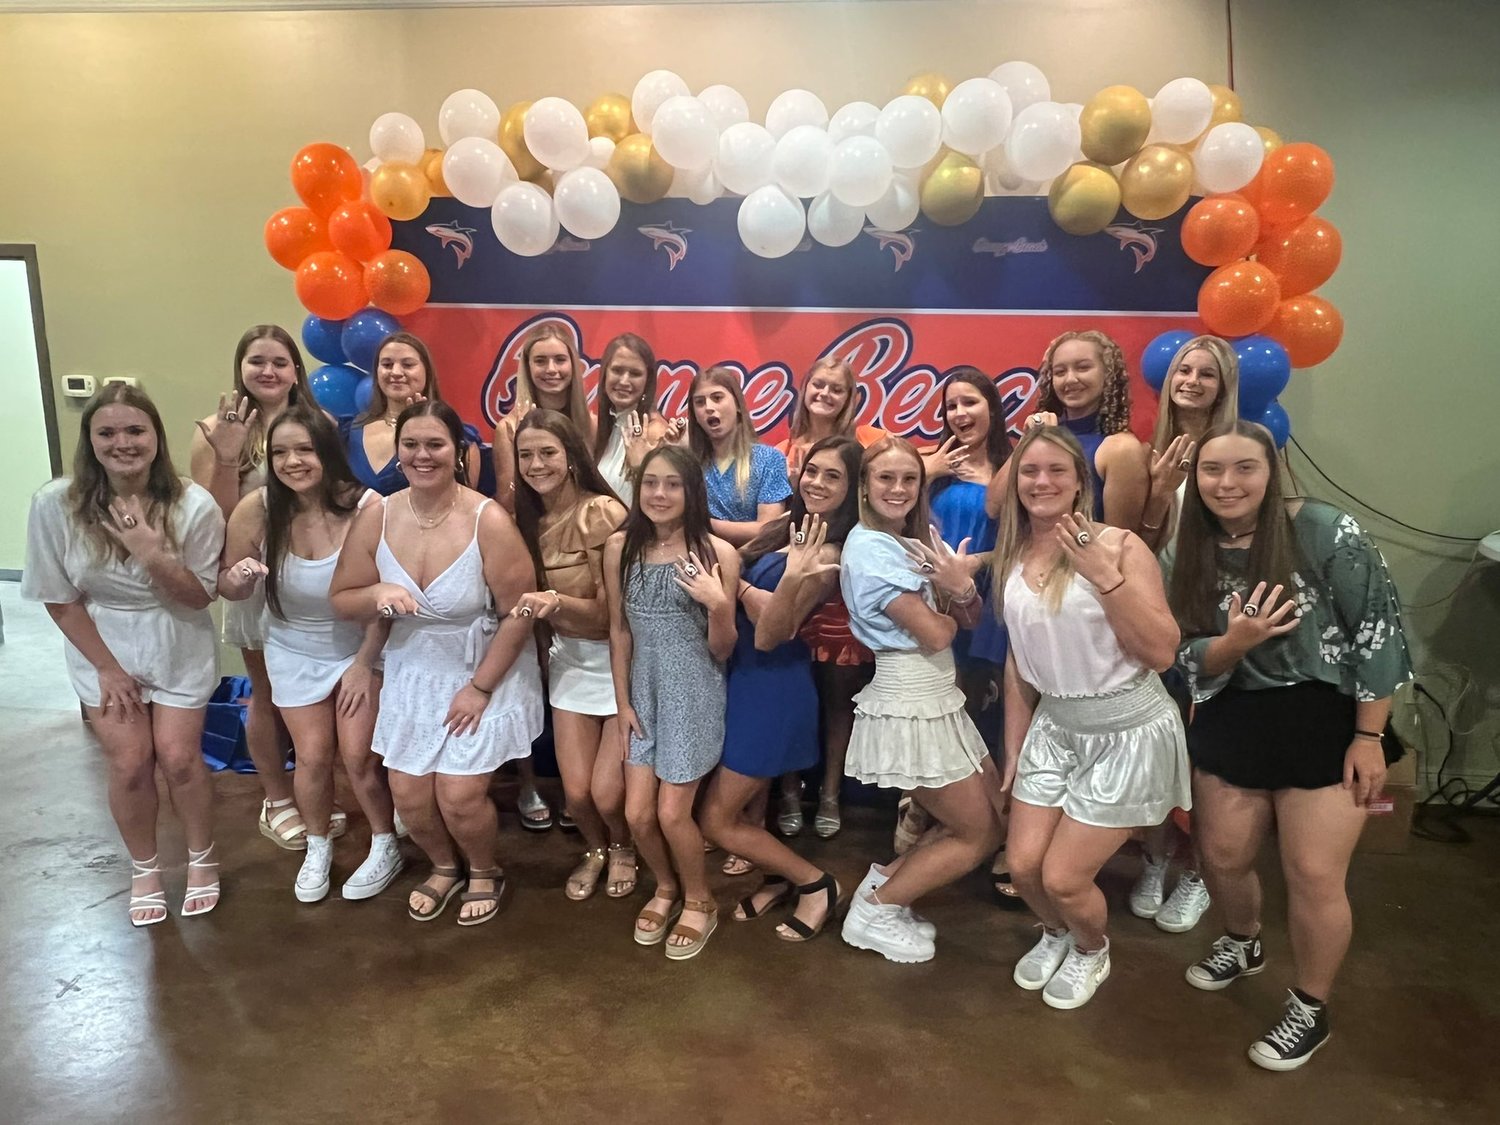 The Orange Beach softball team received their rings from winning the 2022 AHSAA Class 2A state championship with an undefeated postseason.